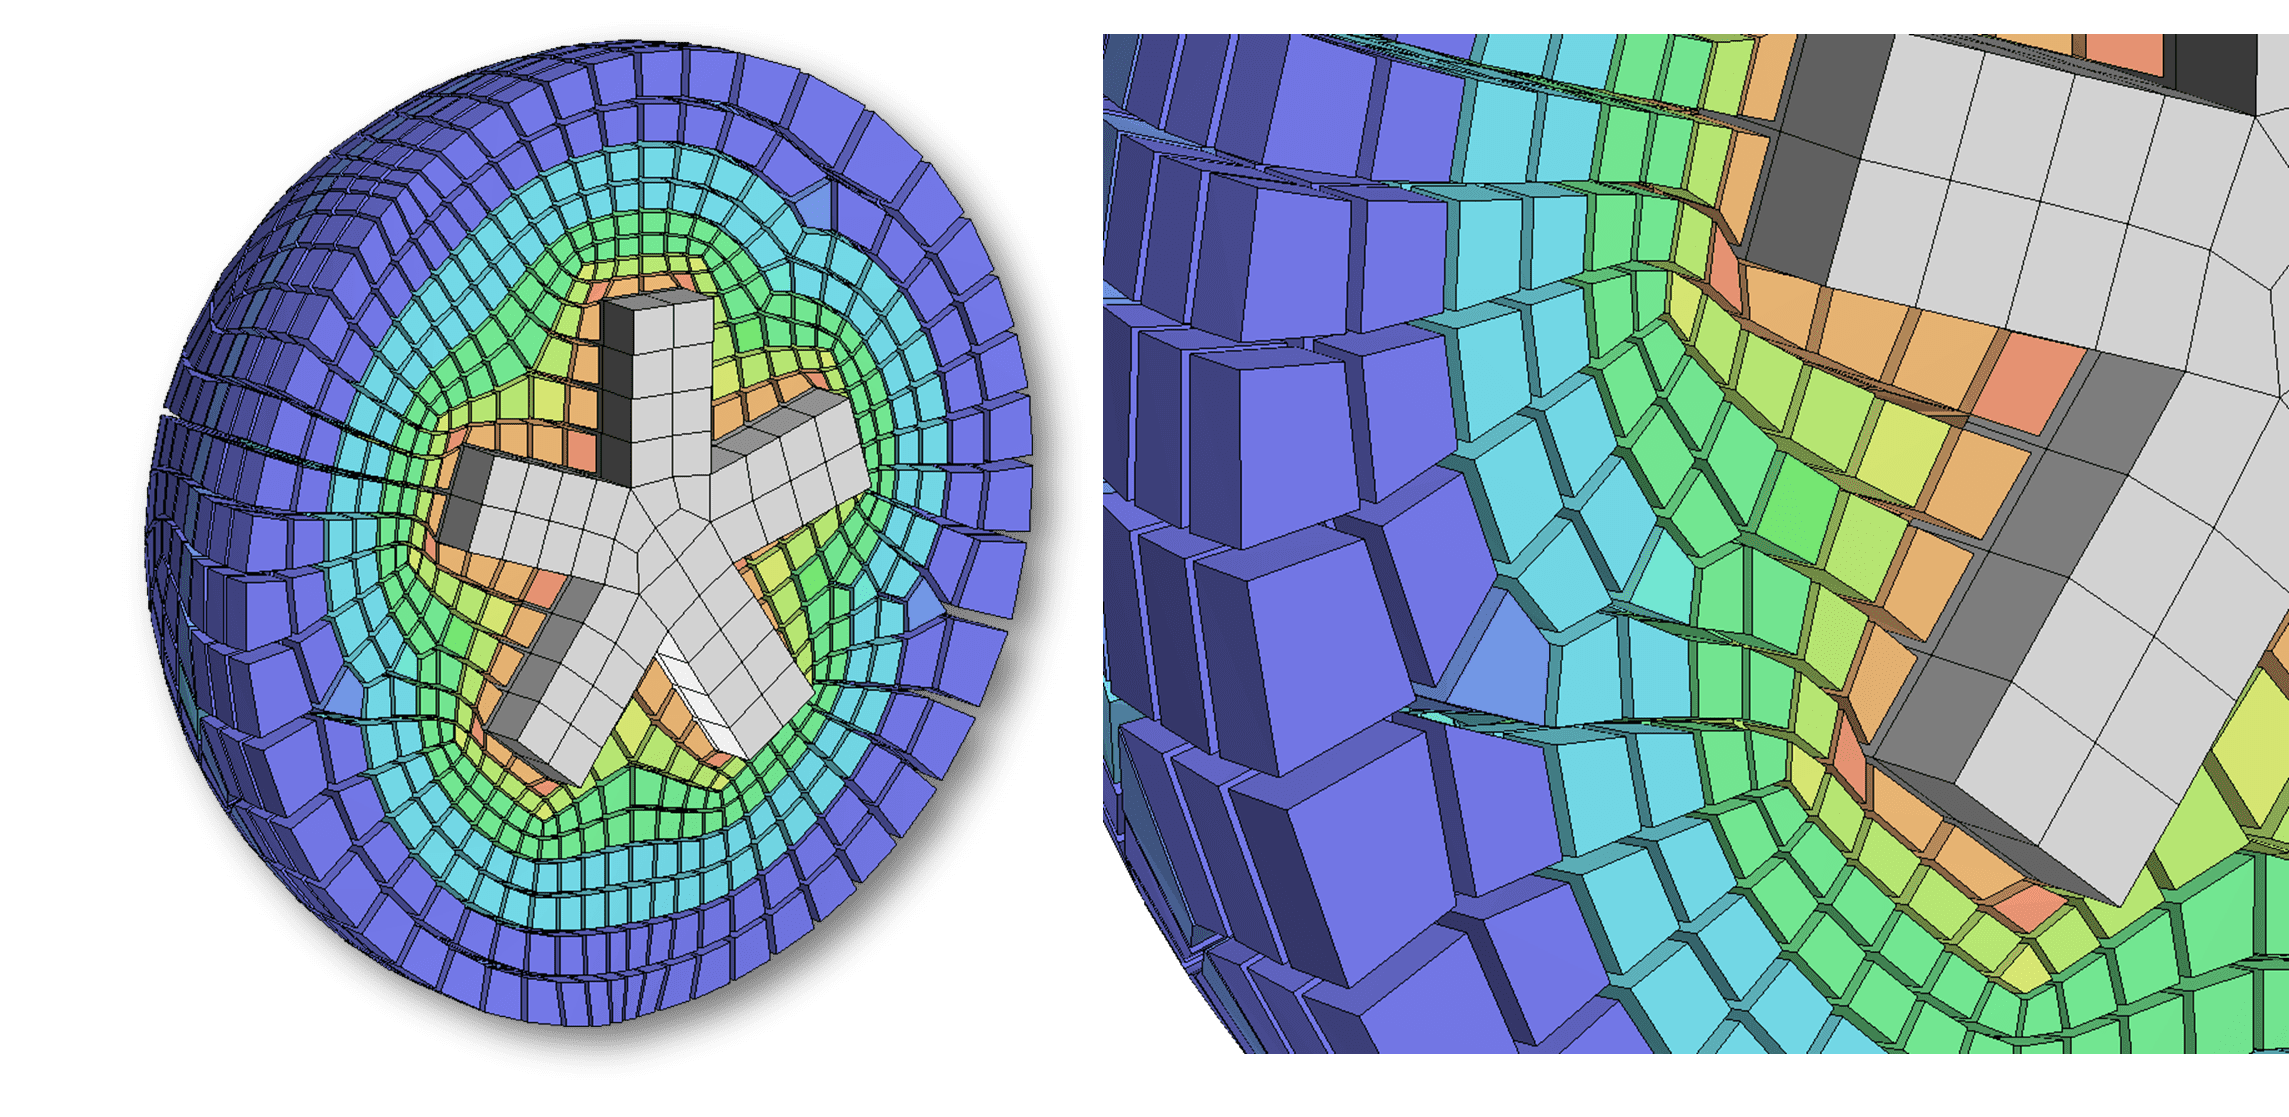 FEA-mesh-generation-types-of-mesh-hexahedron-unstructured-mesh-SimuTech-Group